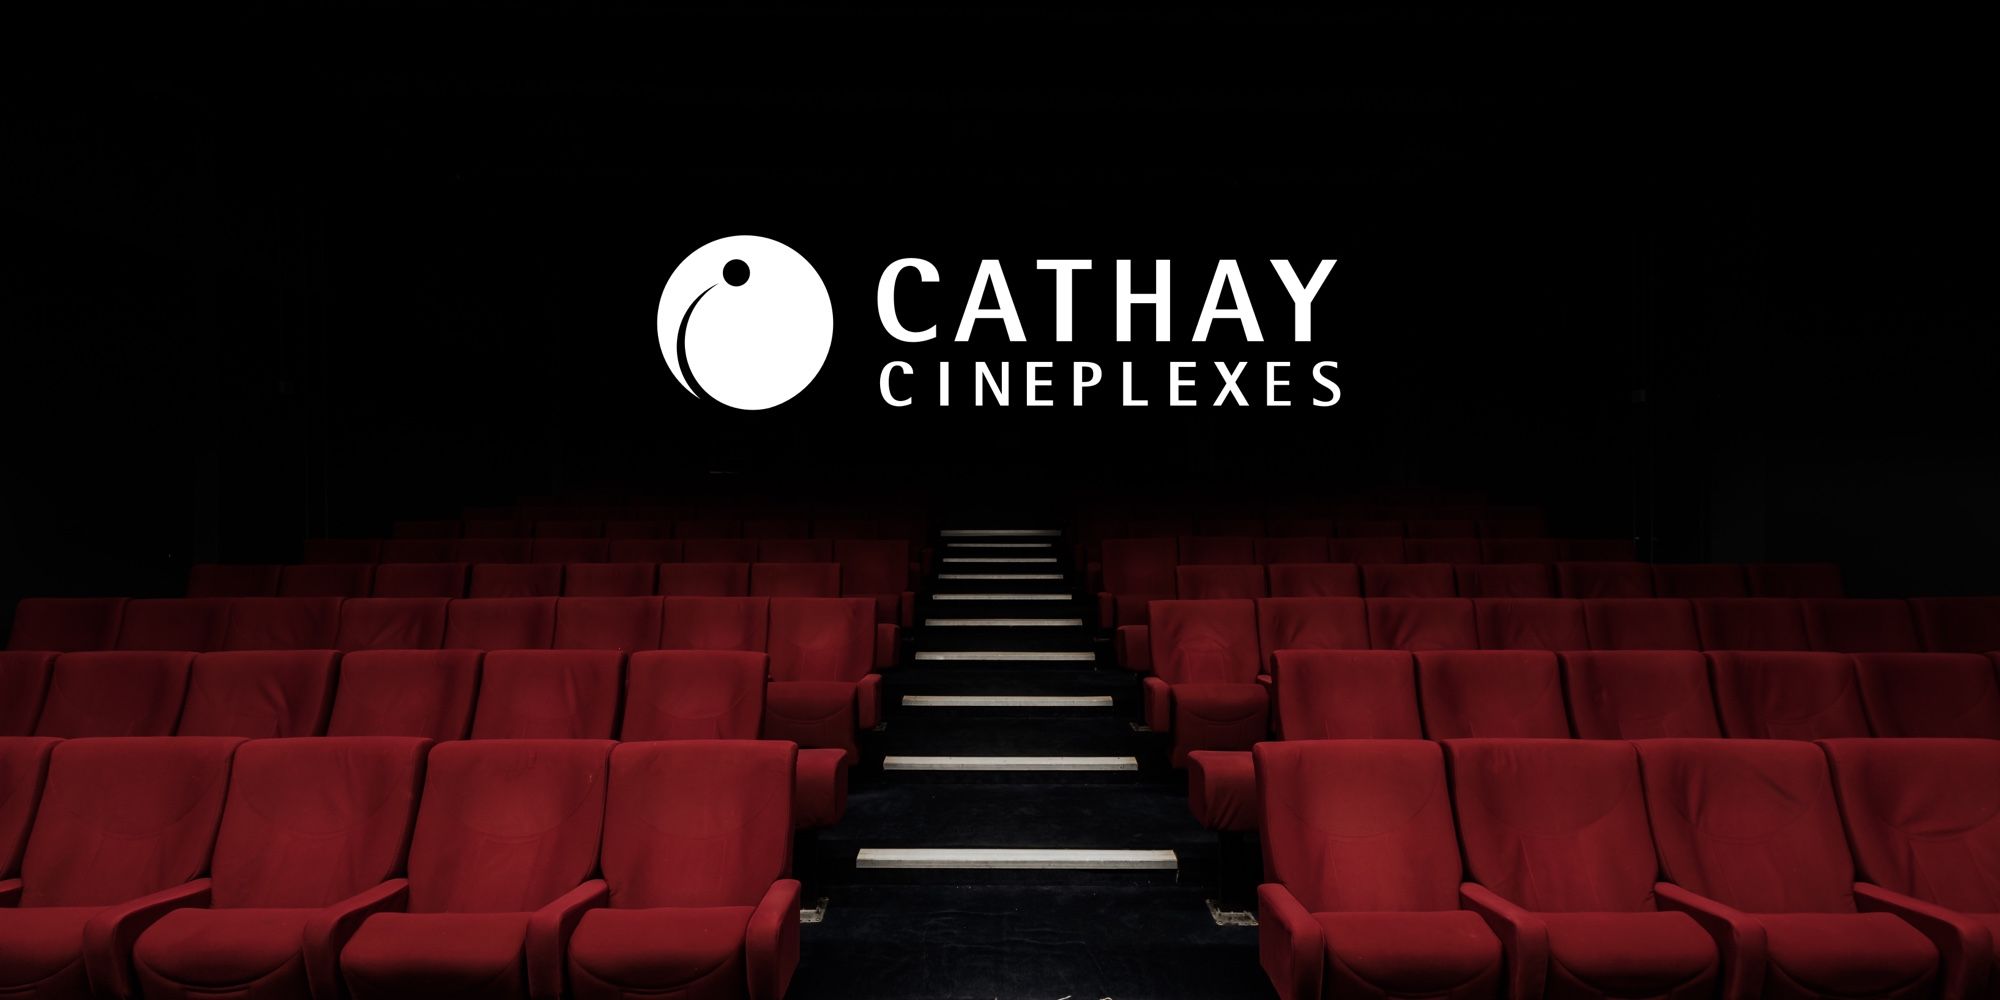 The best Cathay Cineplexes deal for movie junkies in Singapore